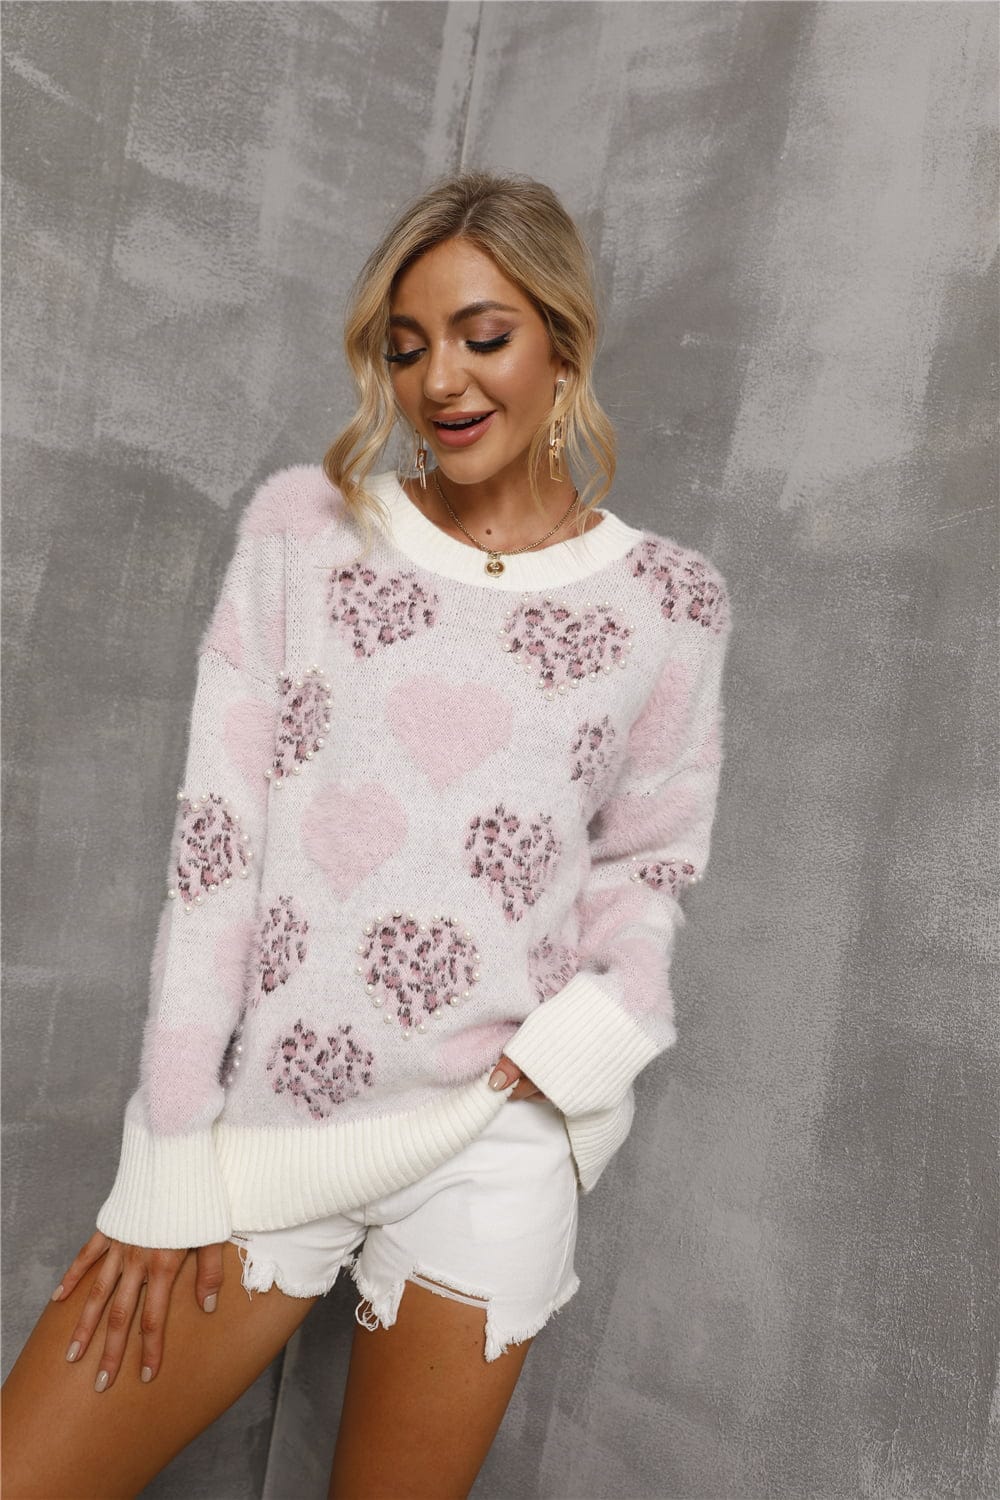  Heart Pattern Round Neck Long Sleeve Sweater by Unique Kulture. The sweater features a cozy round neckline and long sleeves. The pattern on the sweater consists of intricate heart shapes arranged in a repetitive and stylish design, adding a touch of romance to the overall look. The color palette includes soft shades of pink, red, and white, creating a harmonious and eye-catching contrast